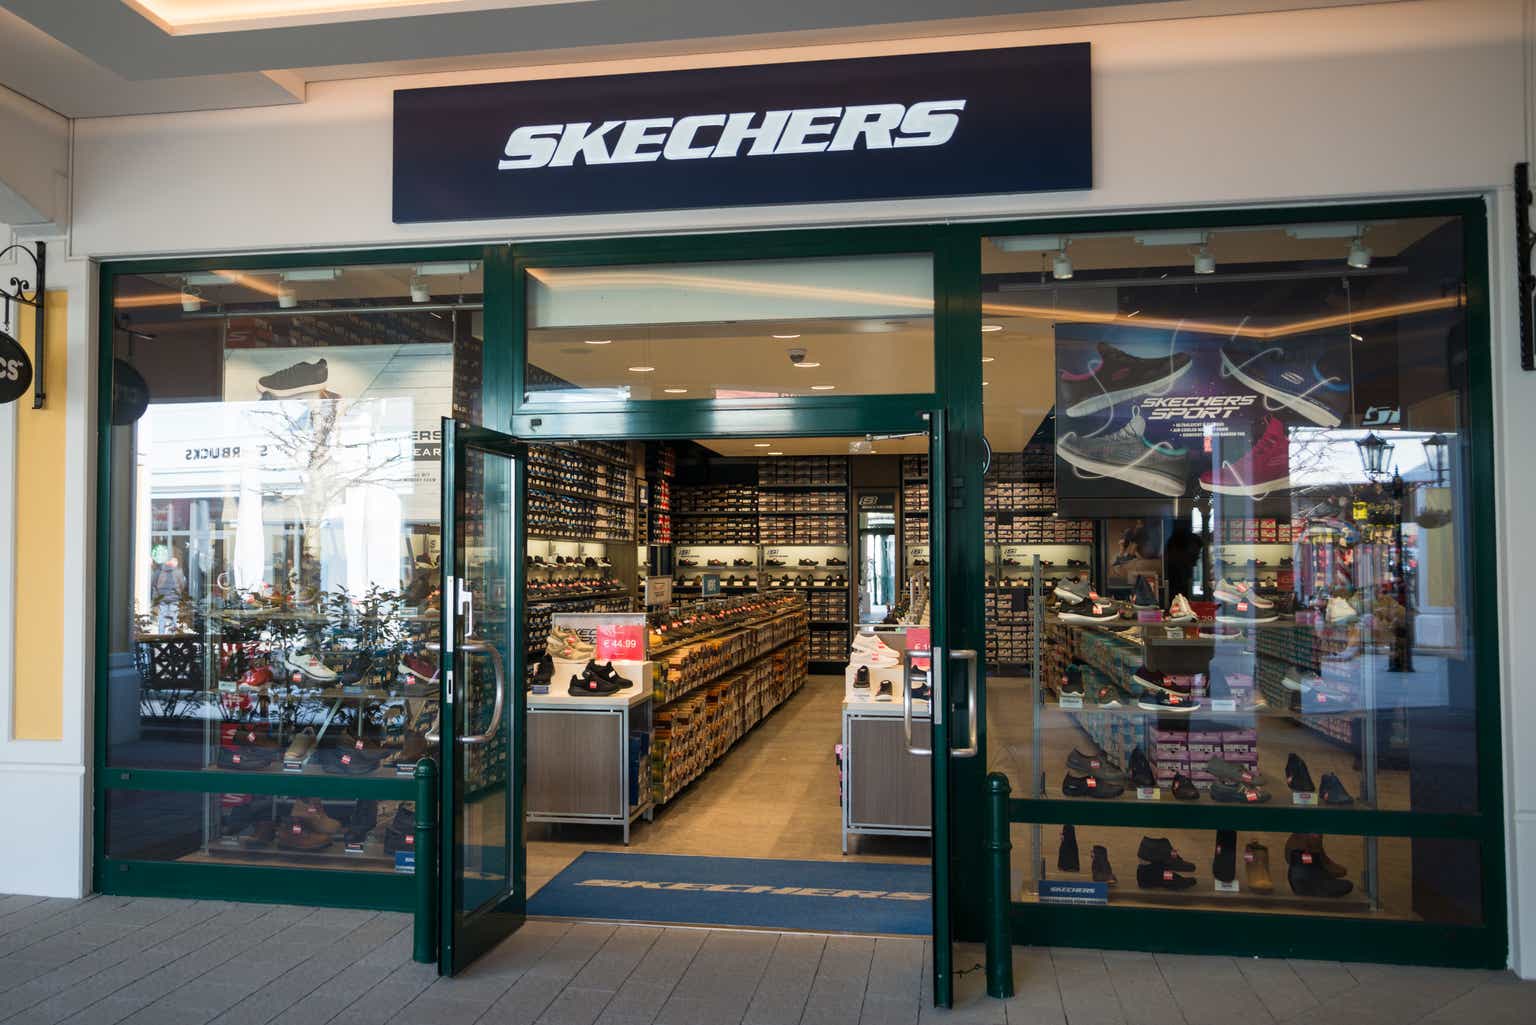 Skechers: Top And Bottom Line Growth Via Direct-To-Consumer Strategy